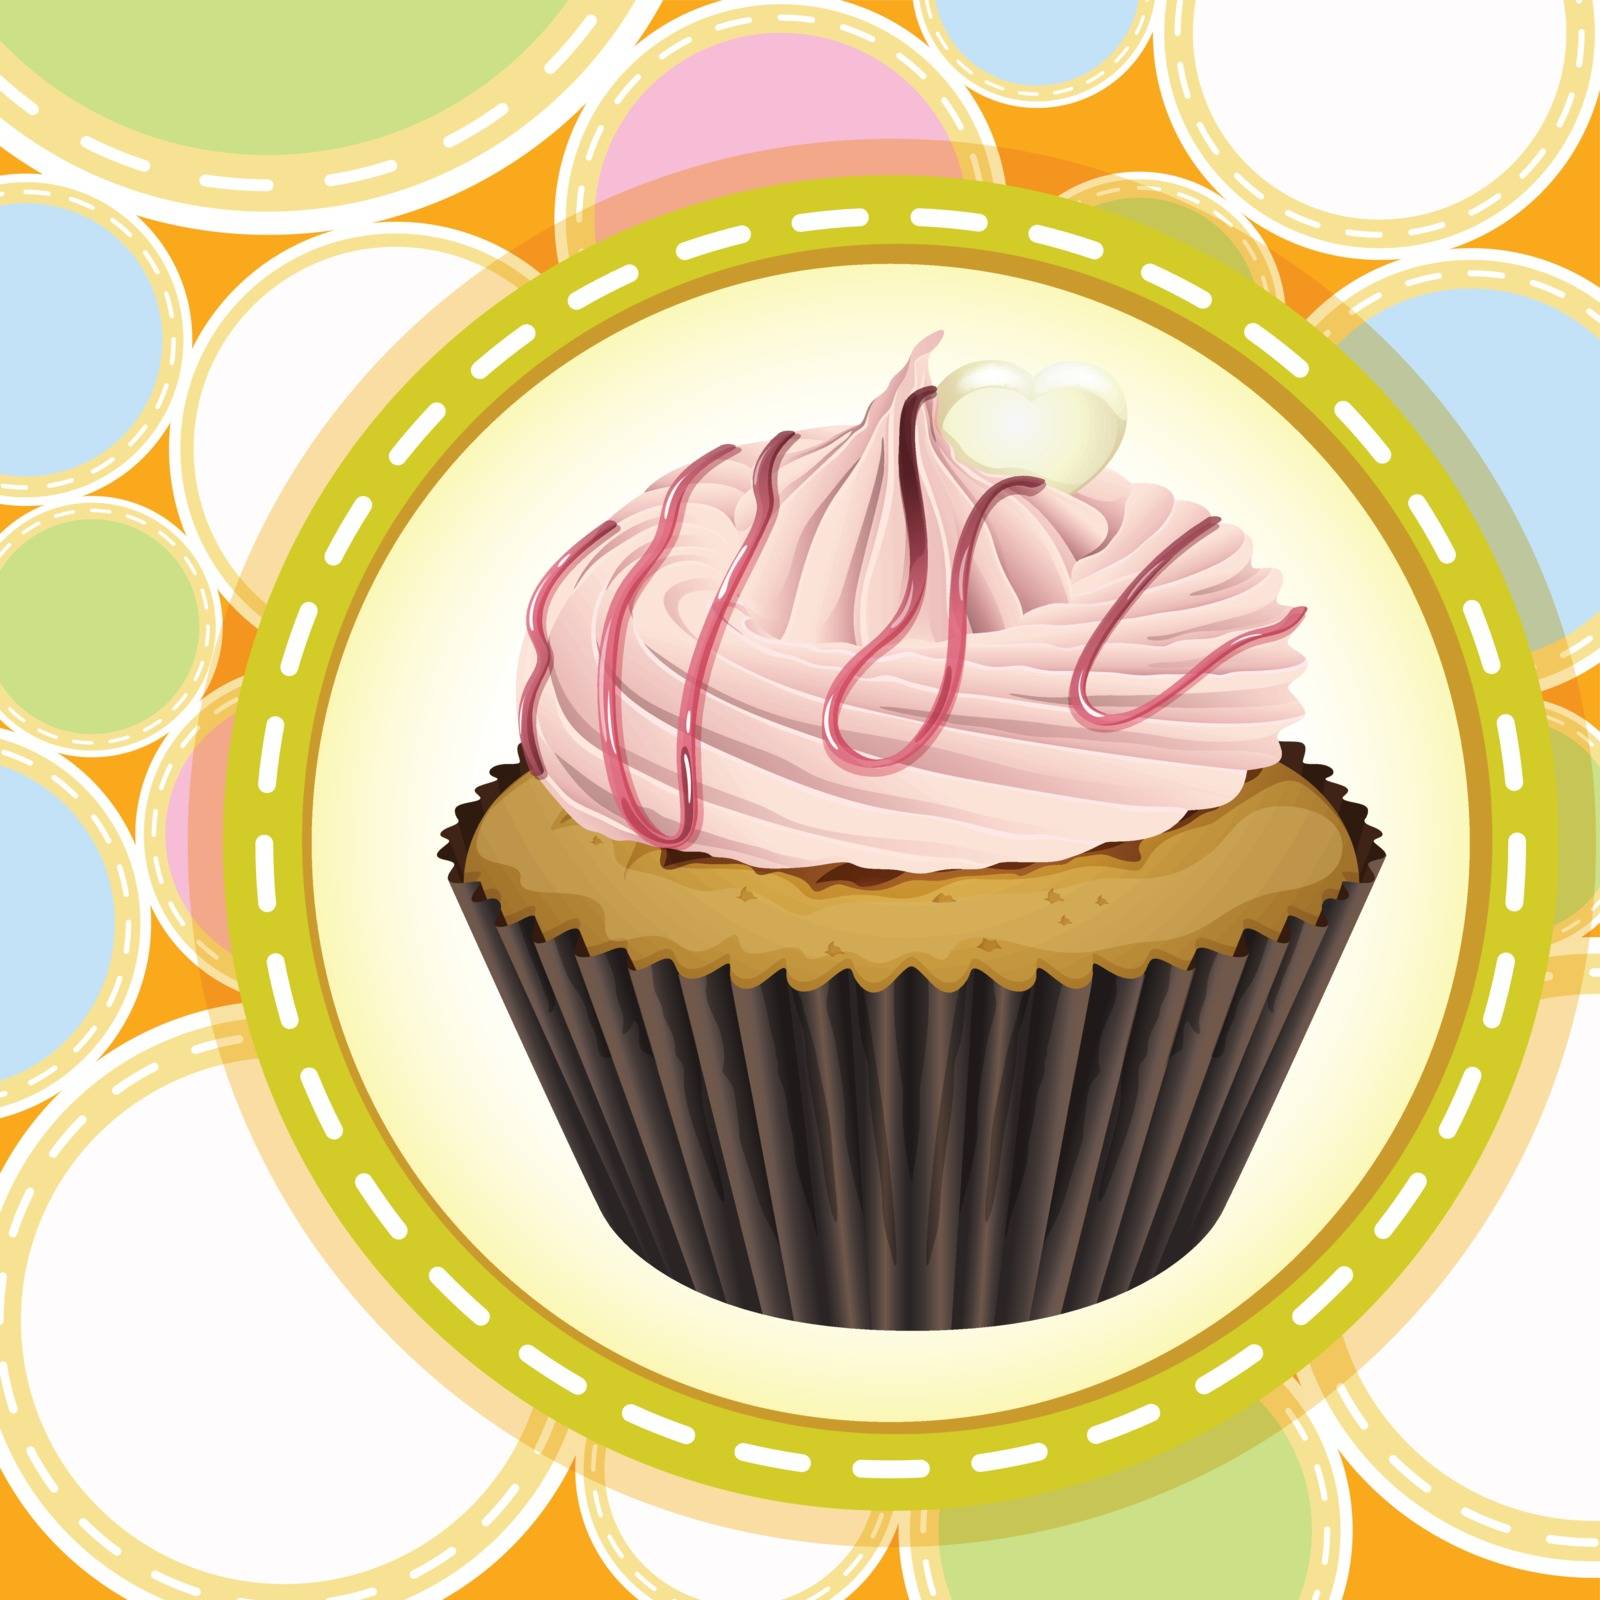 Illustration of an isolated cupcake and a wallpaper